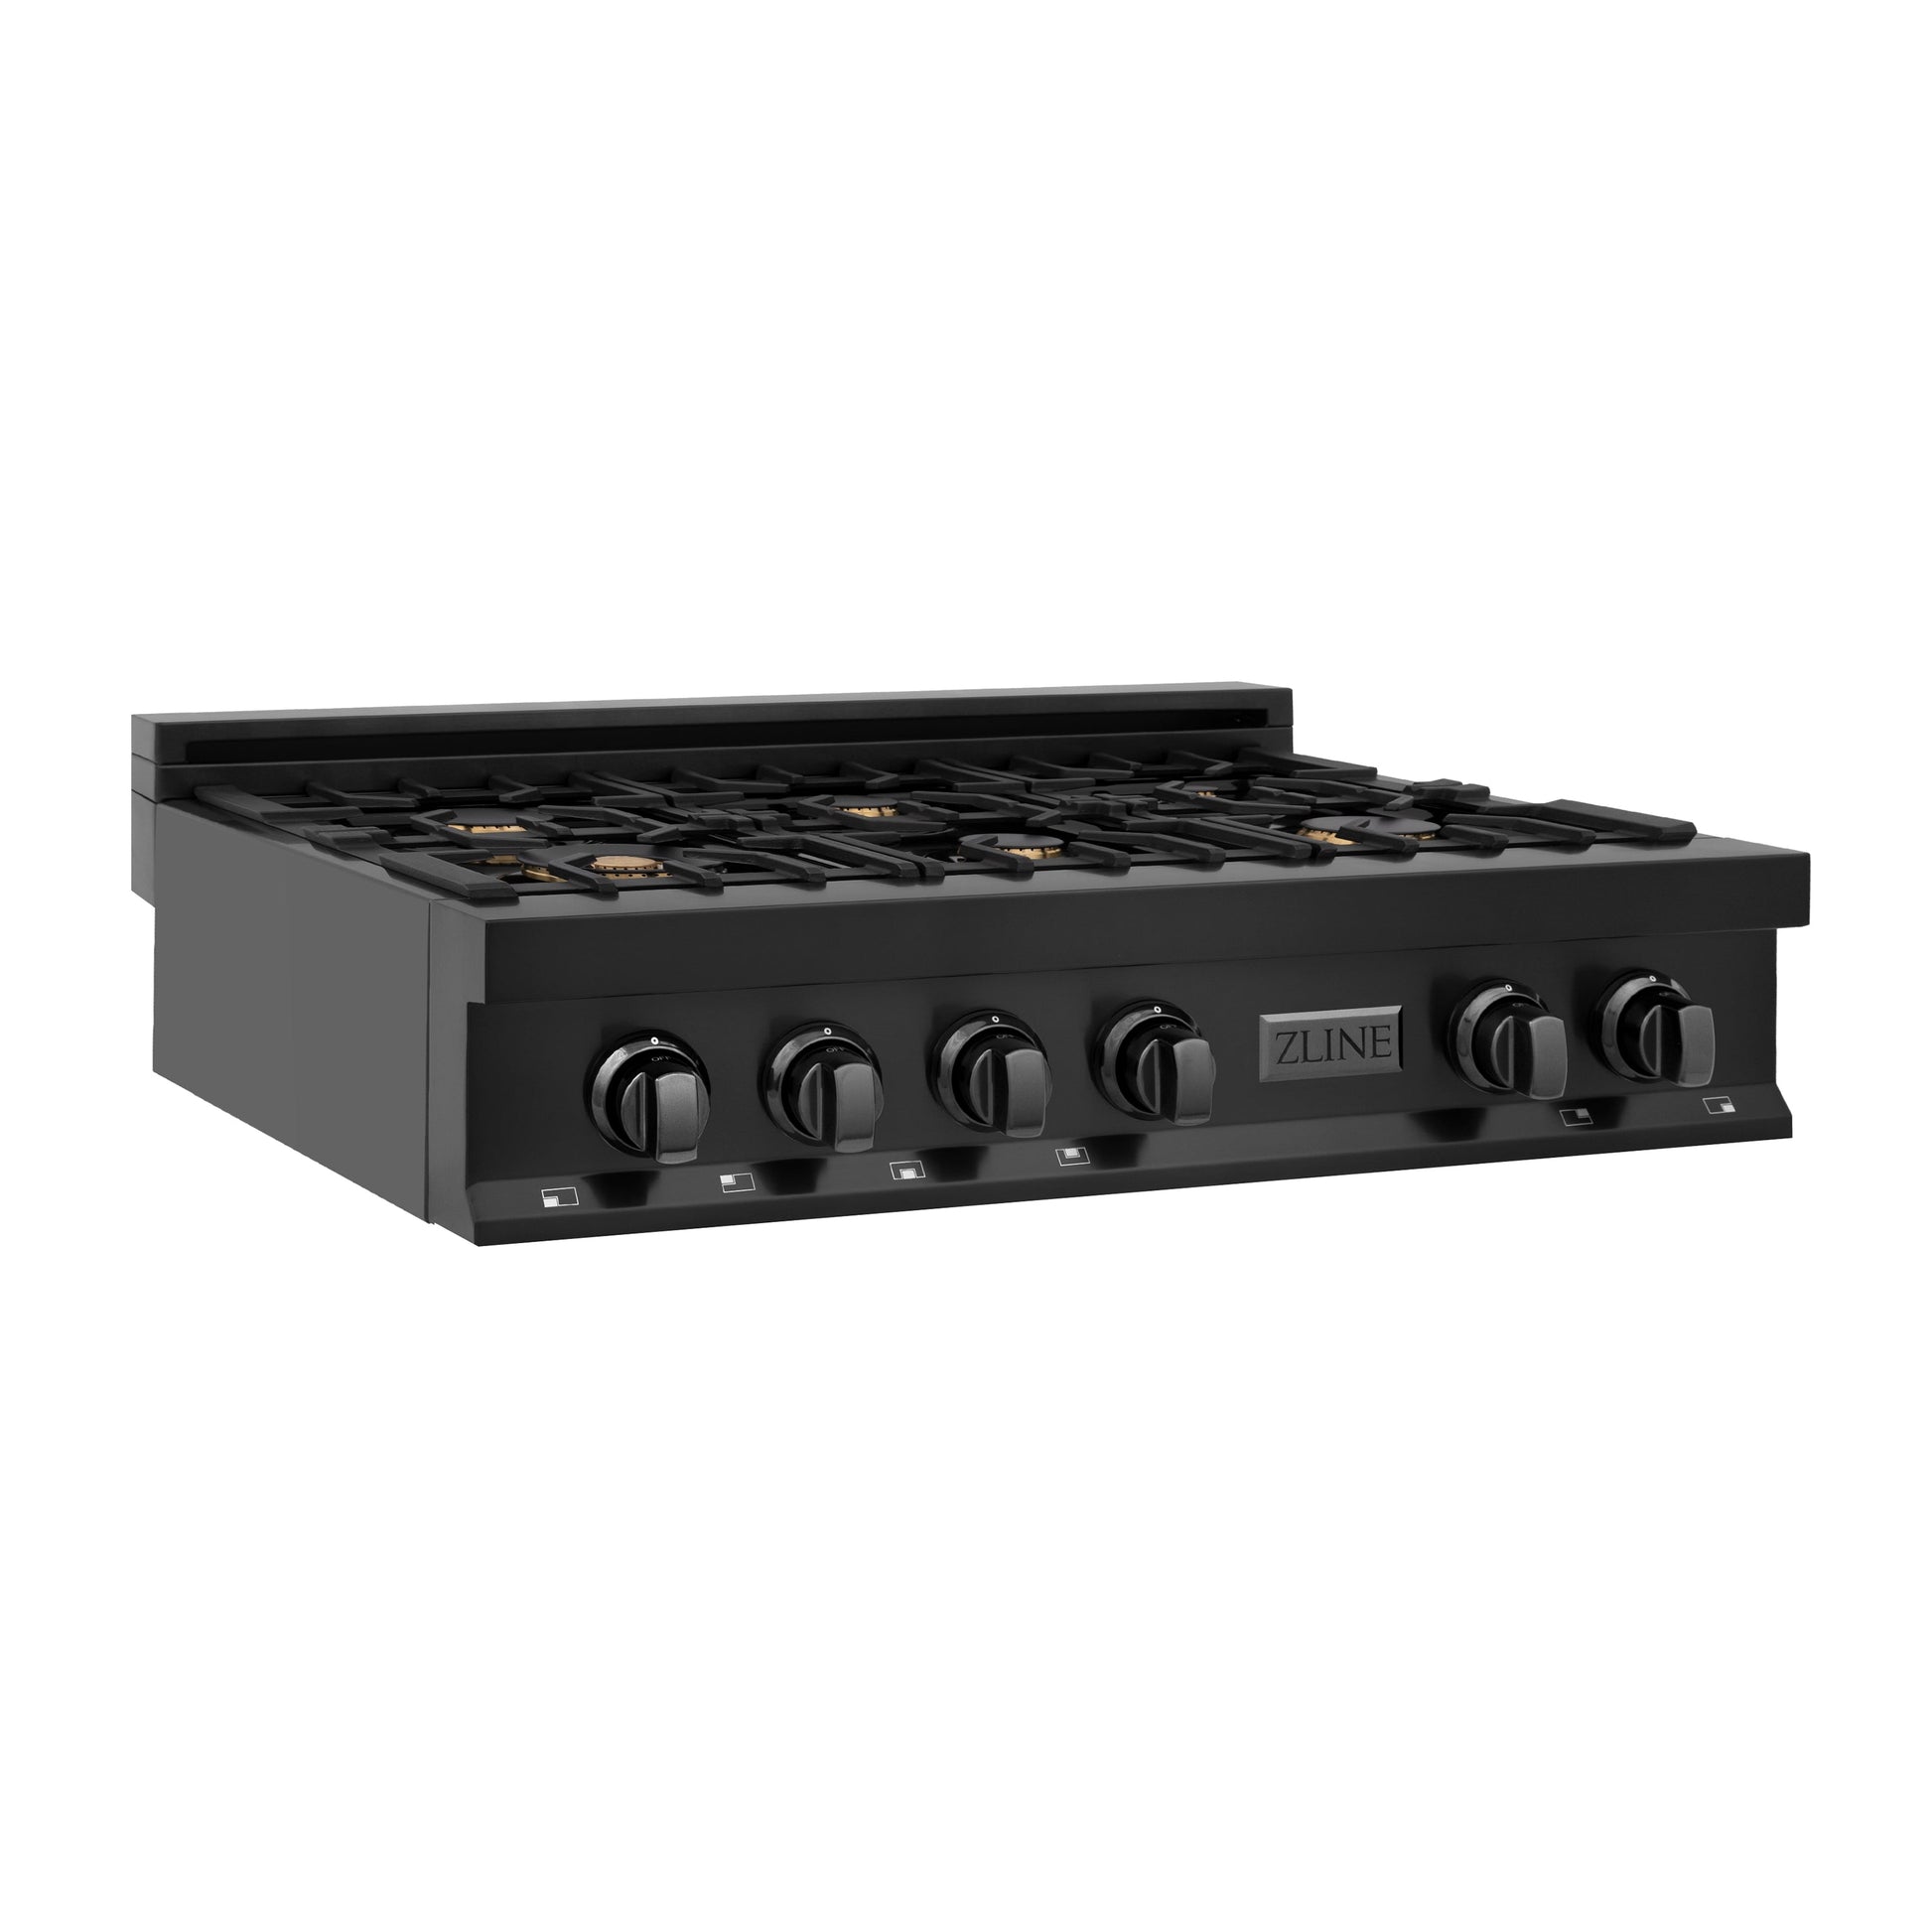 ZLINE 36 in. Porcelain Gas Rangetop in Black Stainless with 6 Gas Brass Burners (RTB-BR-36) side.